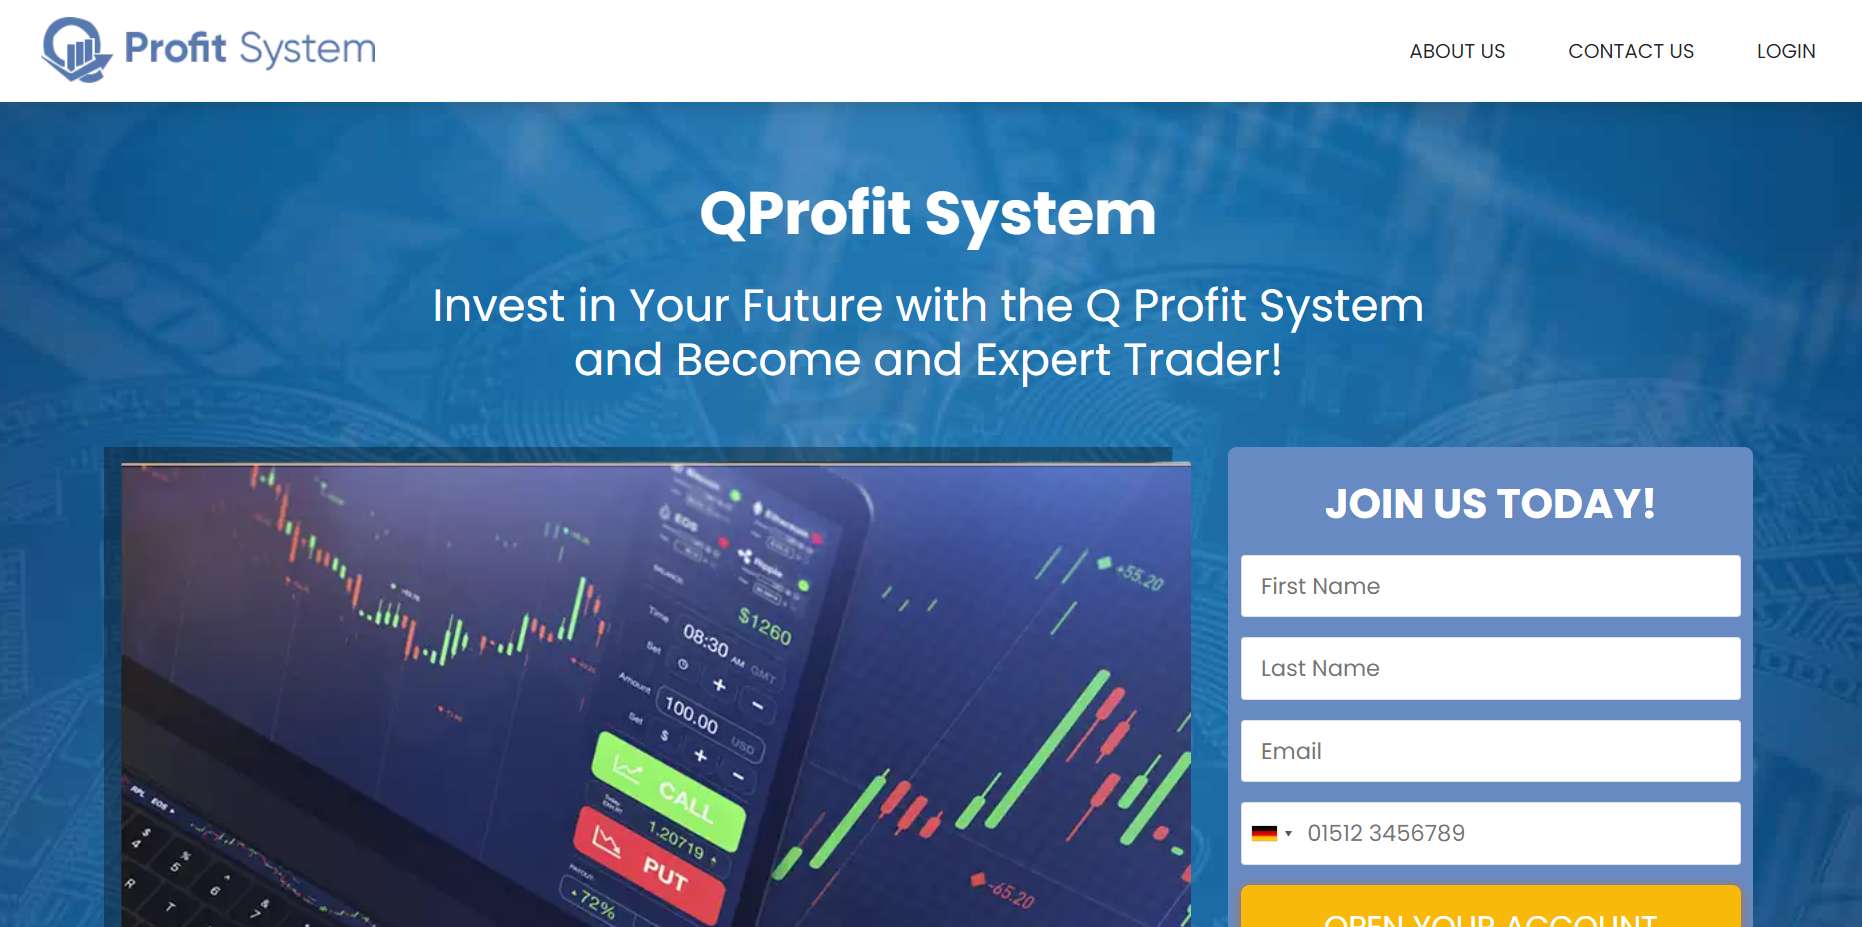 the official website of QProfil System